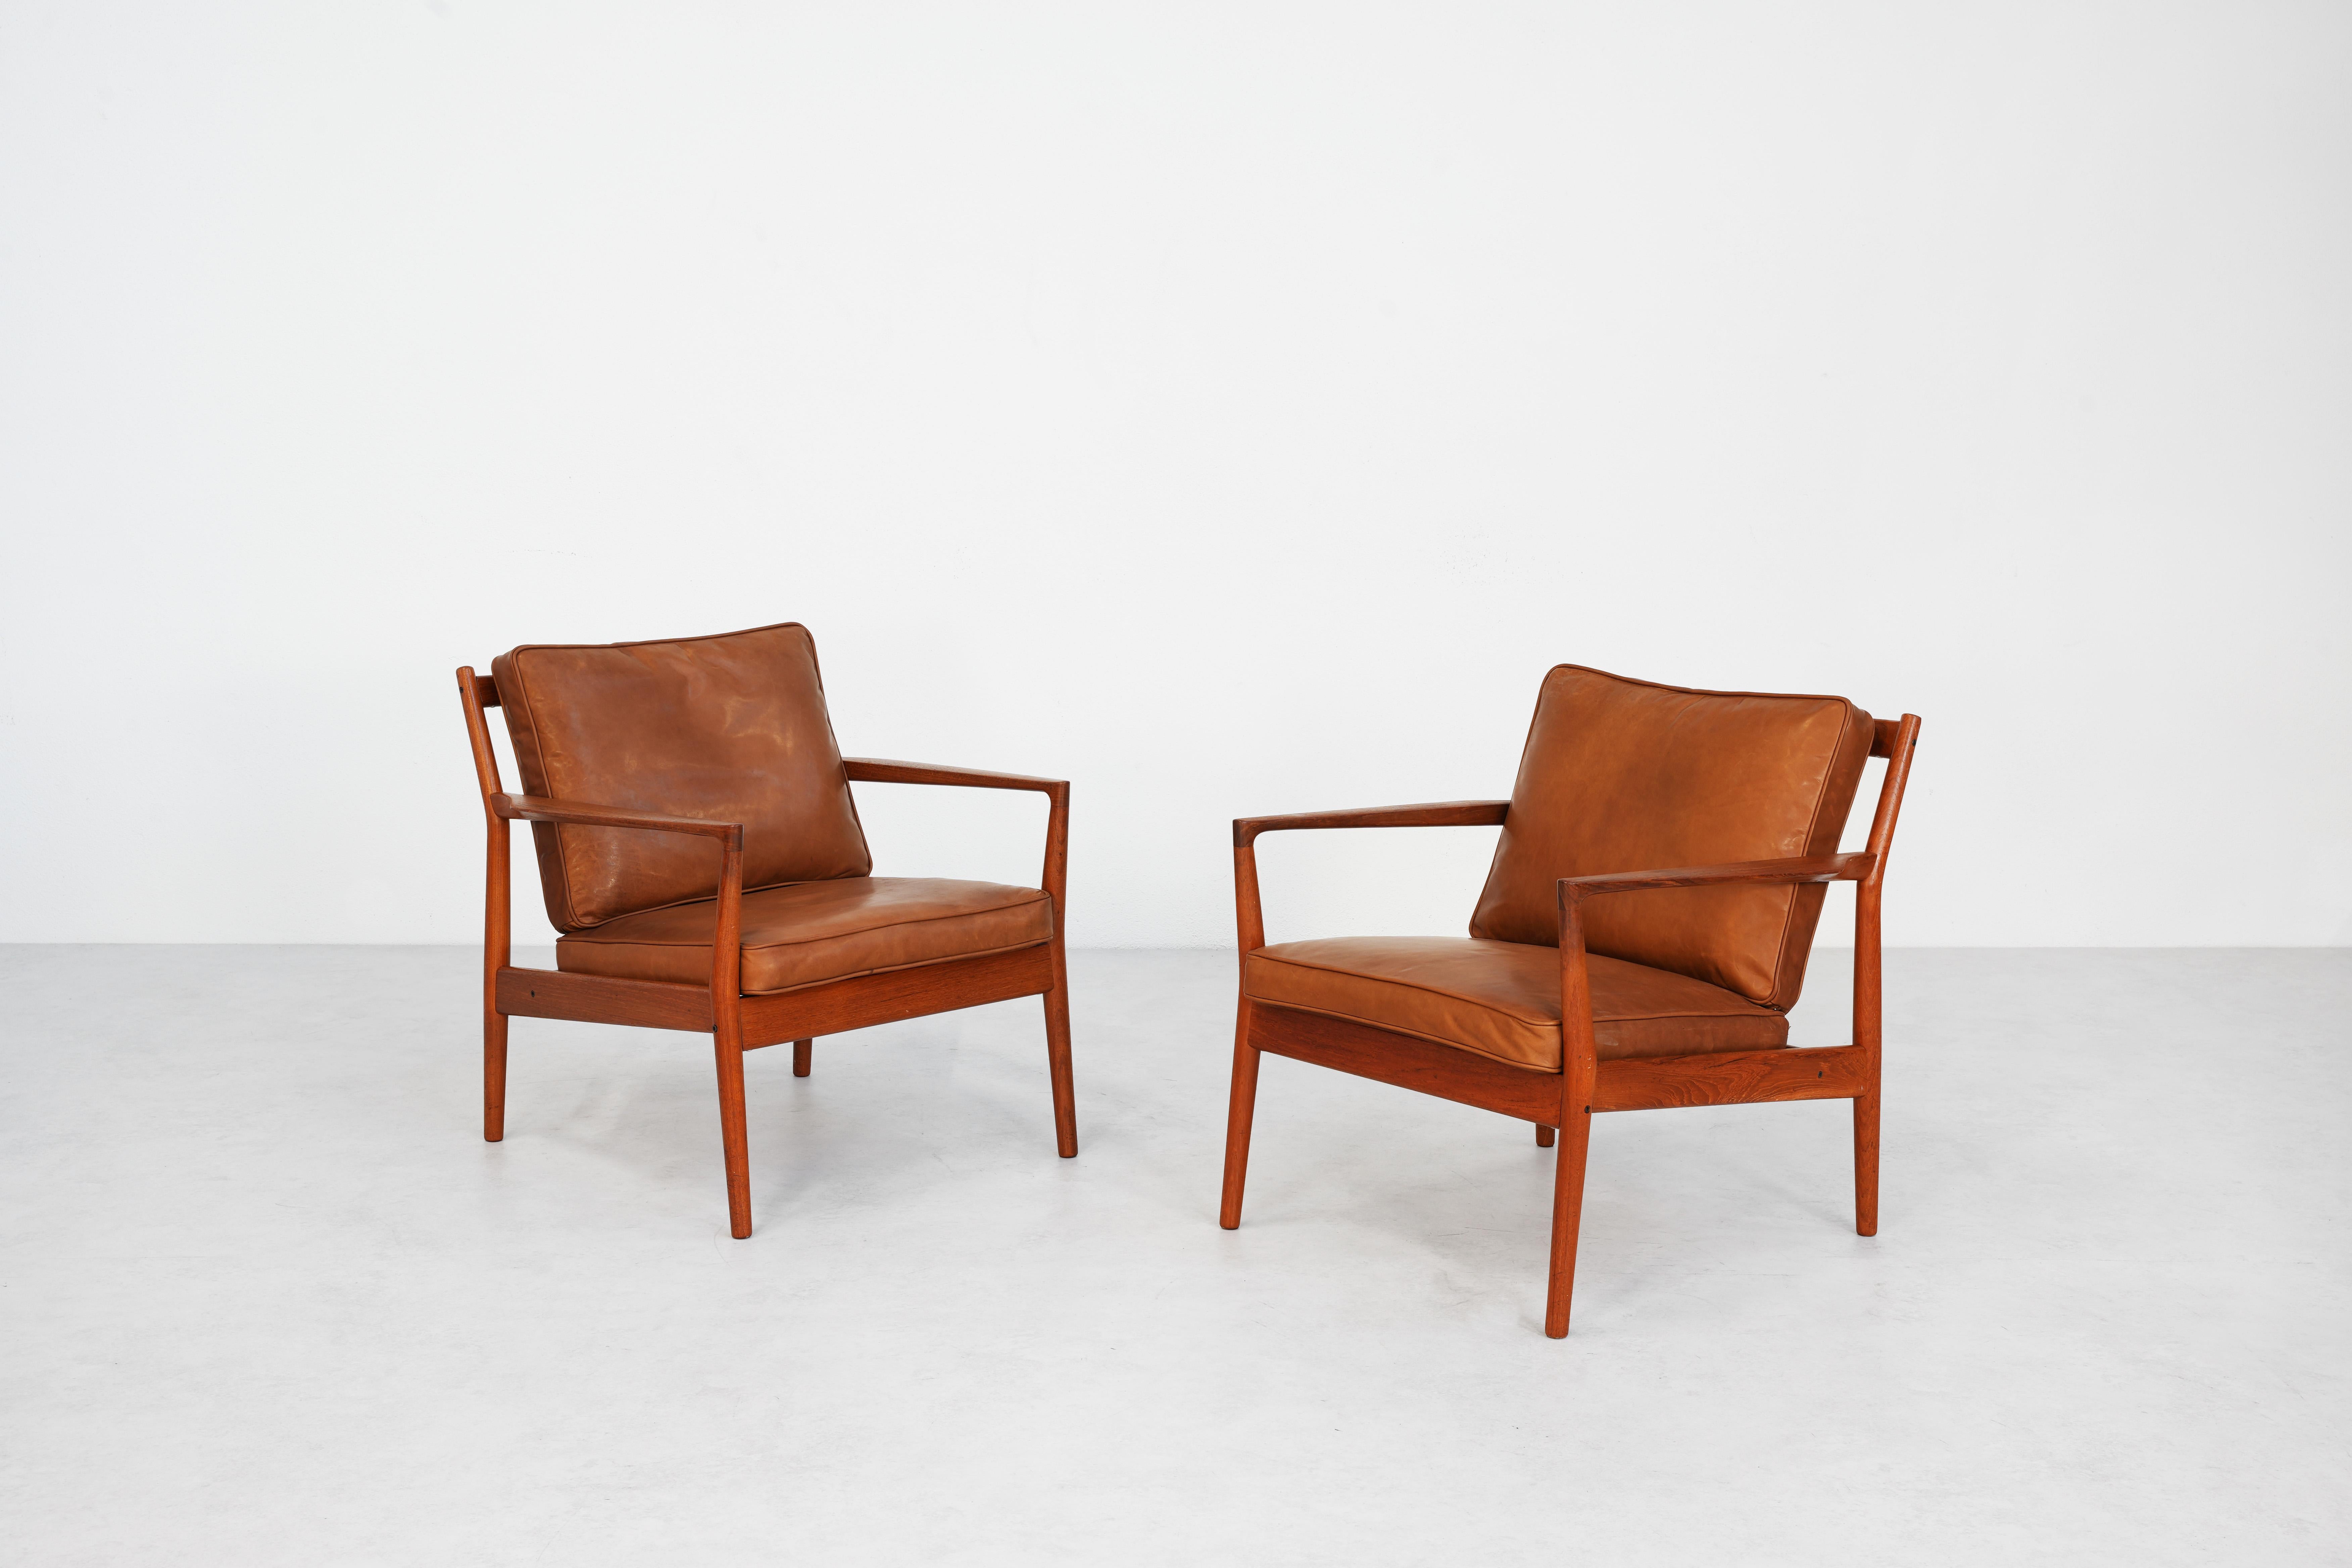 Rare Pair of Lounge Chairs by Steffen Syrach-Larsen for Børge Jensen For Sale 6